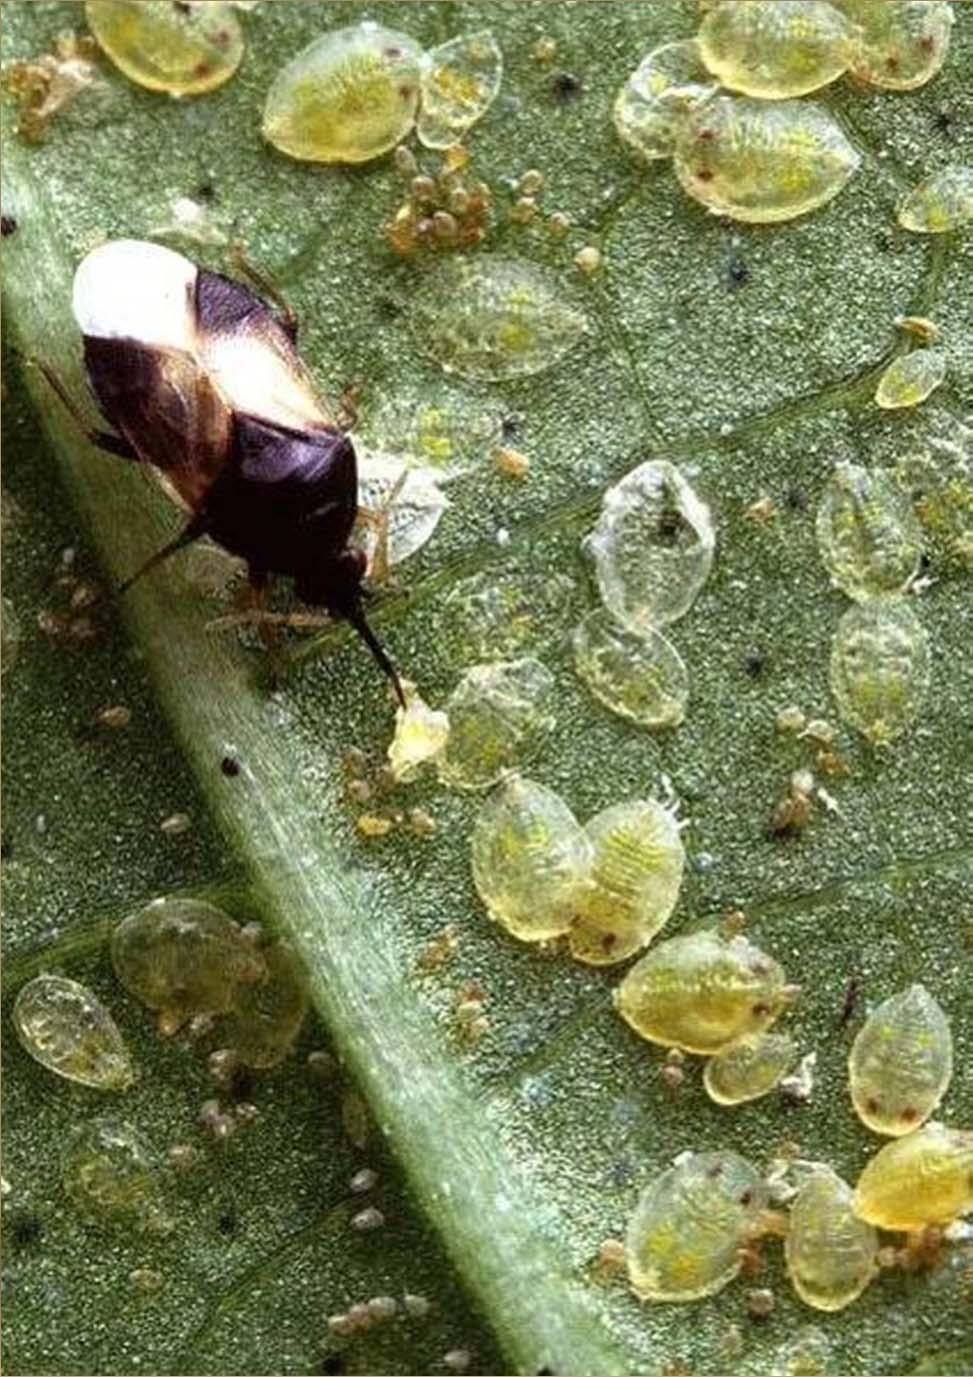 Whitefly control Soaps and oils Systemics Neonicotinoids Insect growth regulators